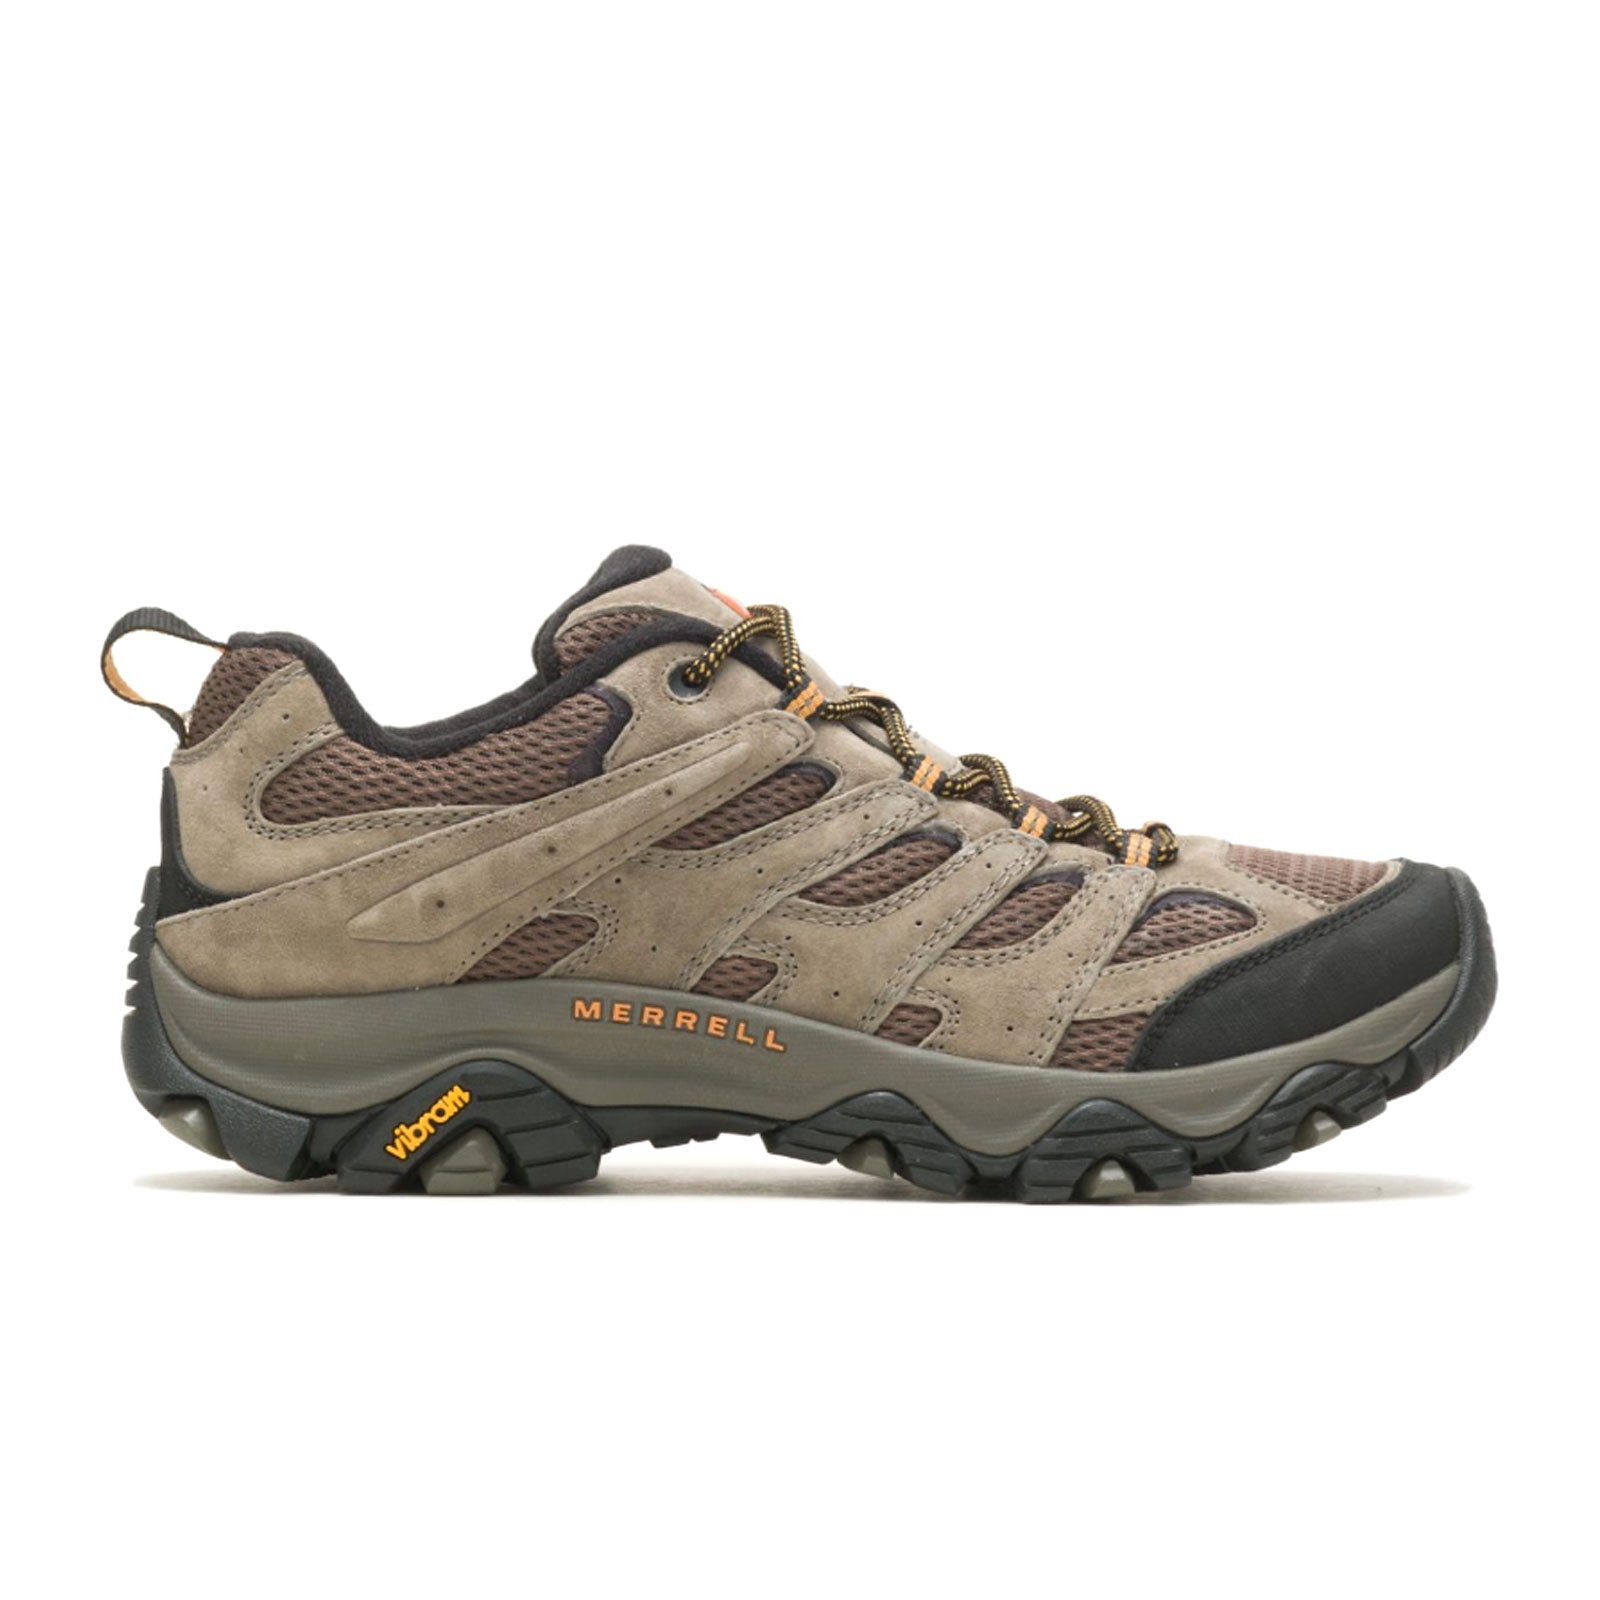 Merrell Shoes, Boots & Sandals - The Heel Fitters